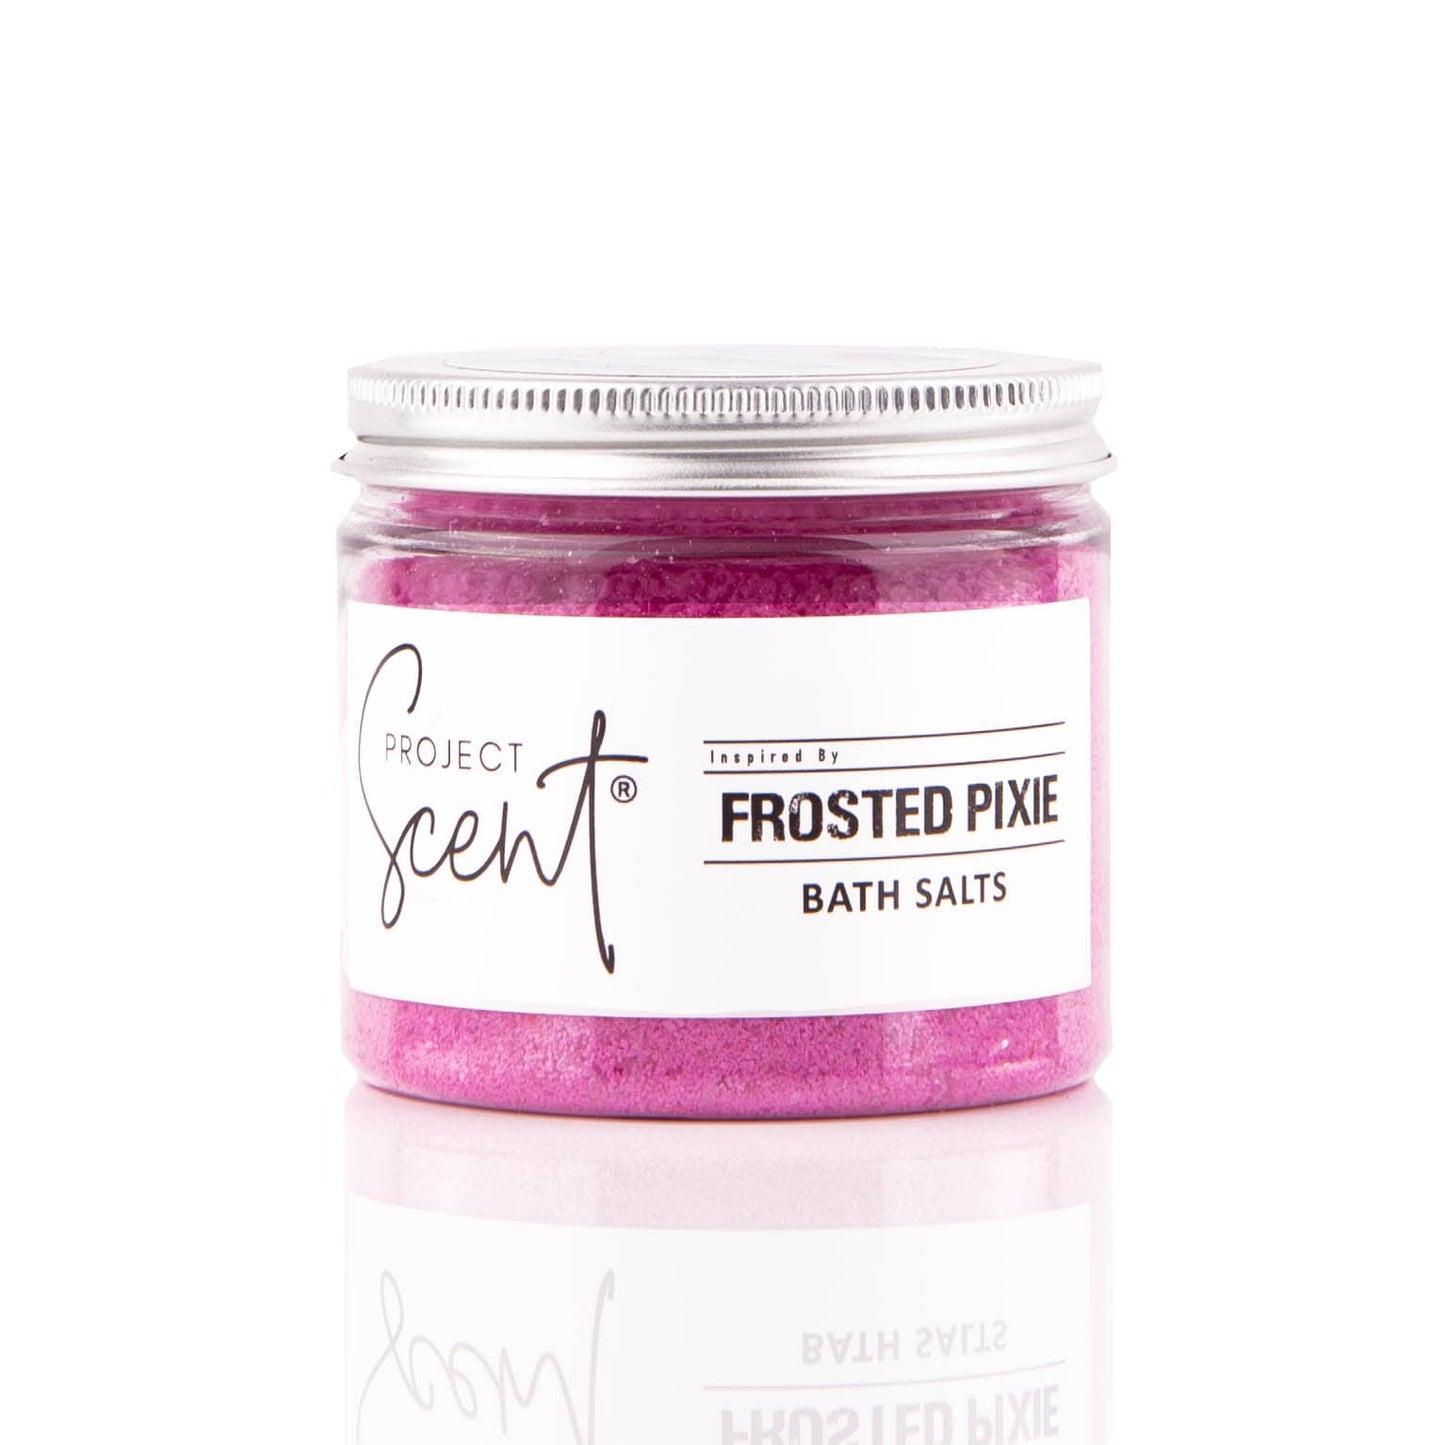 Project Scent Frosted Pixie Triple Bath Salts 180g